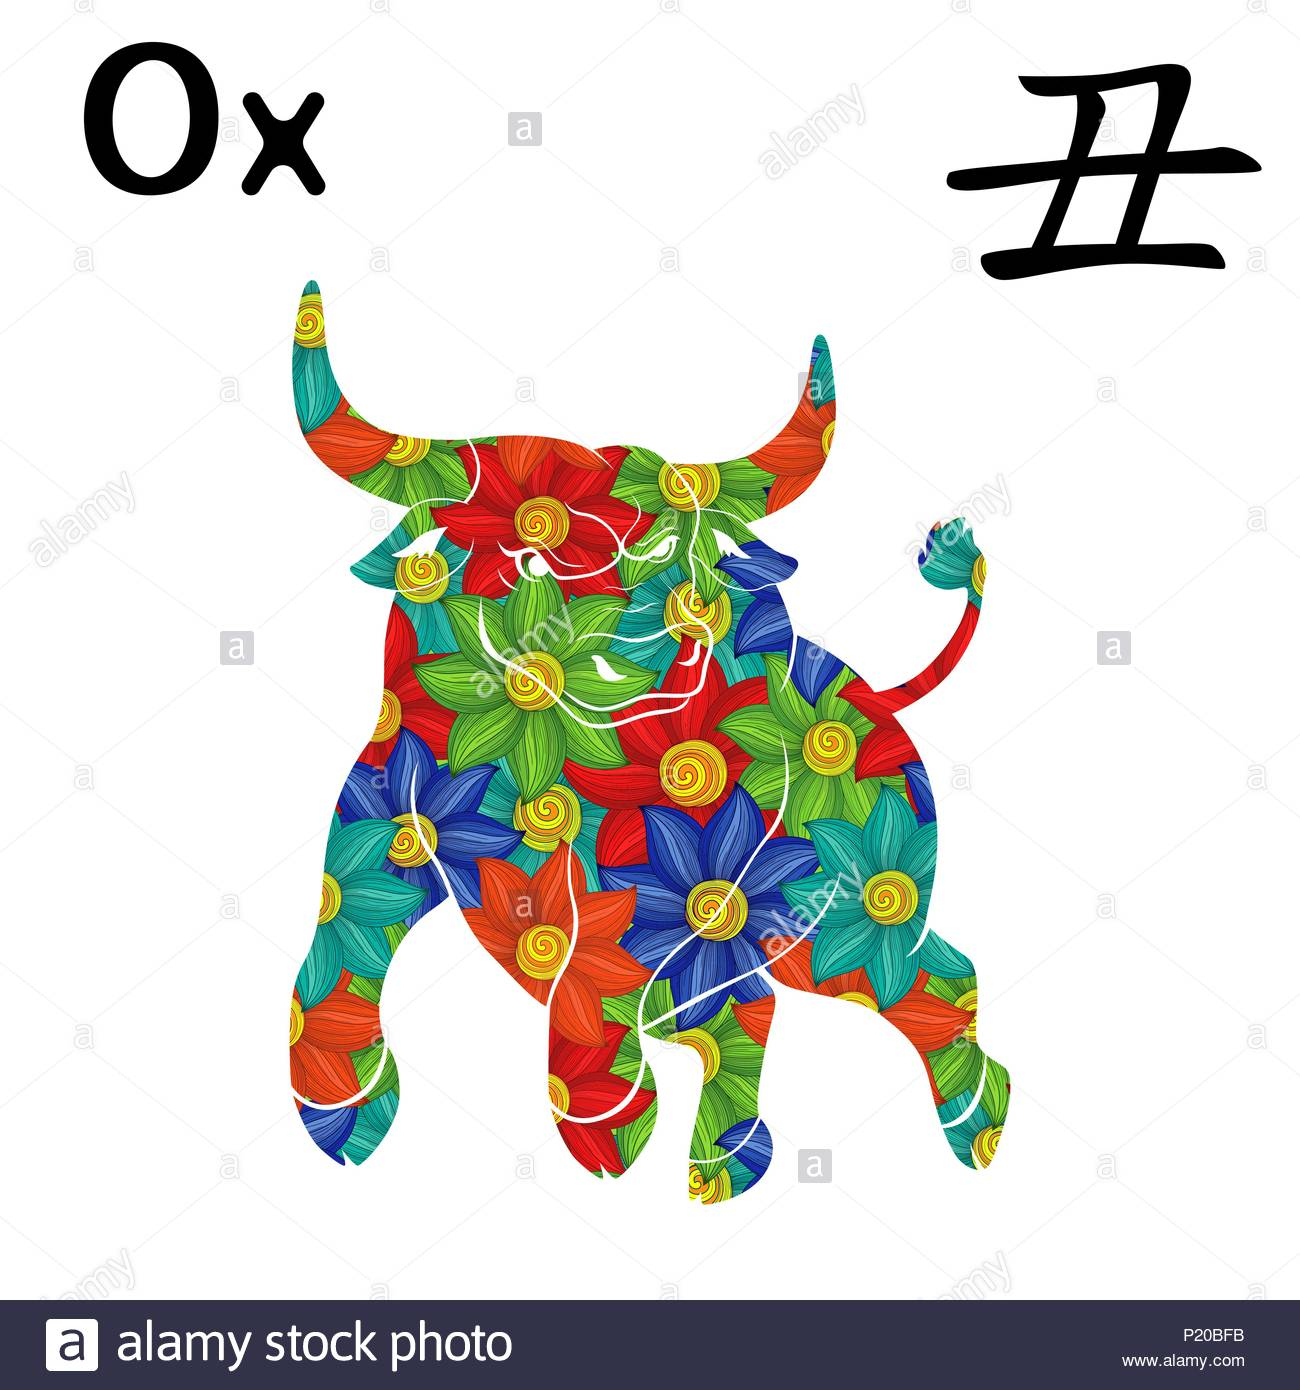 Chinese Zodiac Sign Ox, Symbol Of New Year On The Eastern